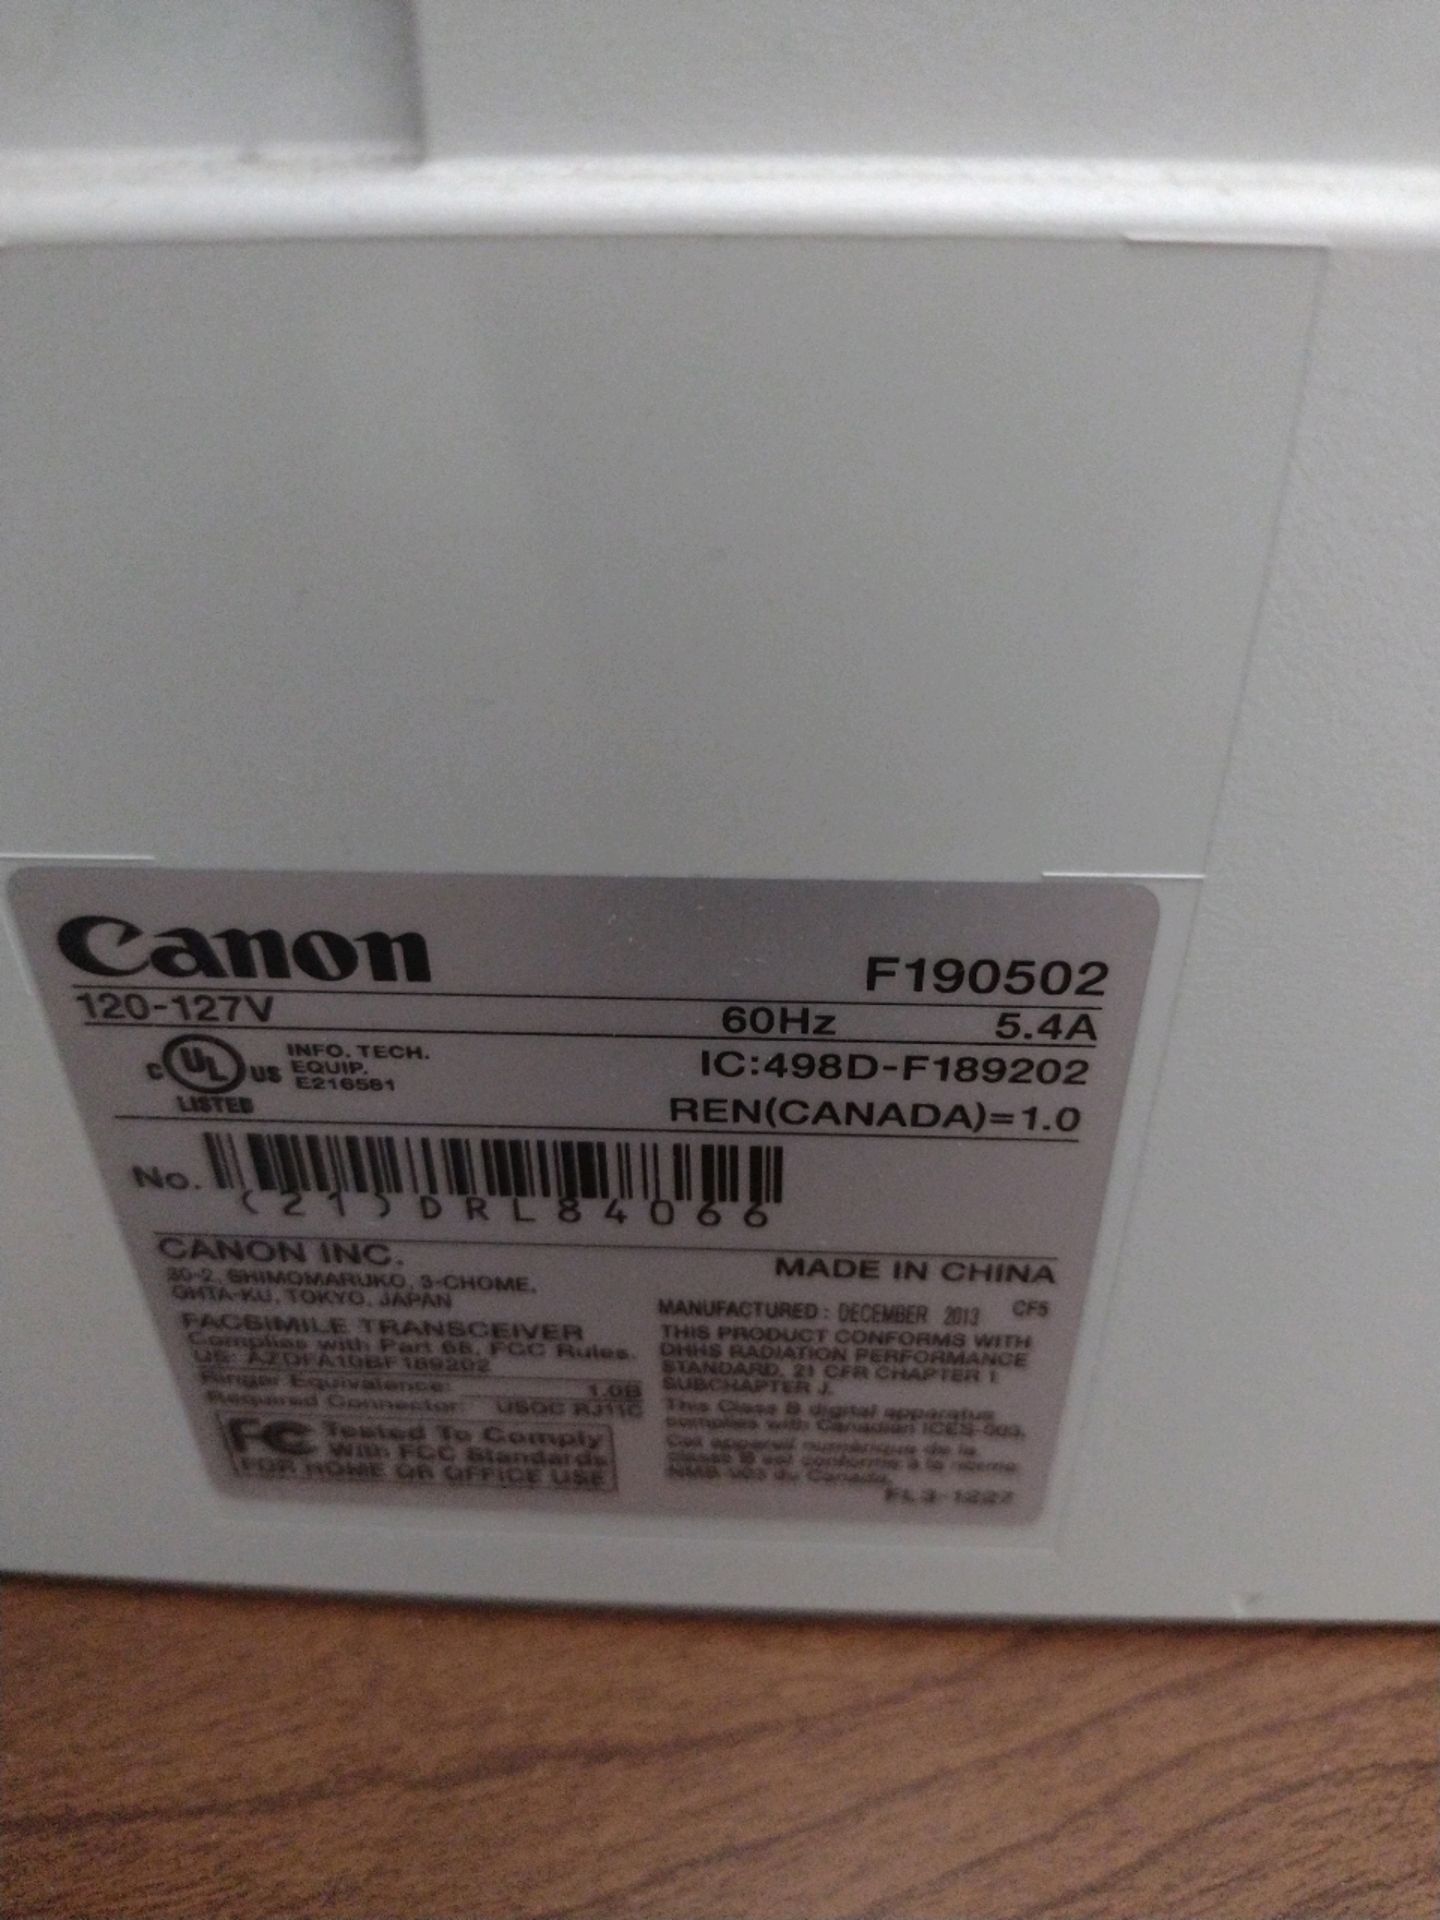 CANON IMAGERUNNER 1025IF MULTIFUNCTION COPIER - Image 4 of 4